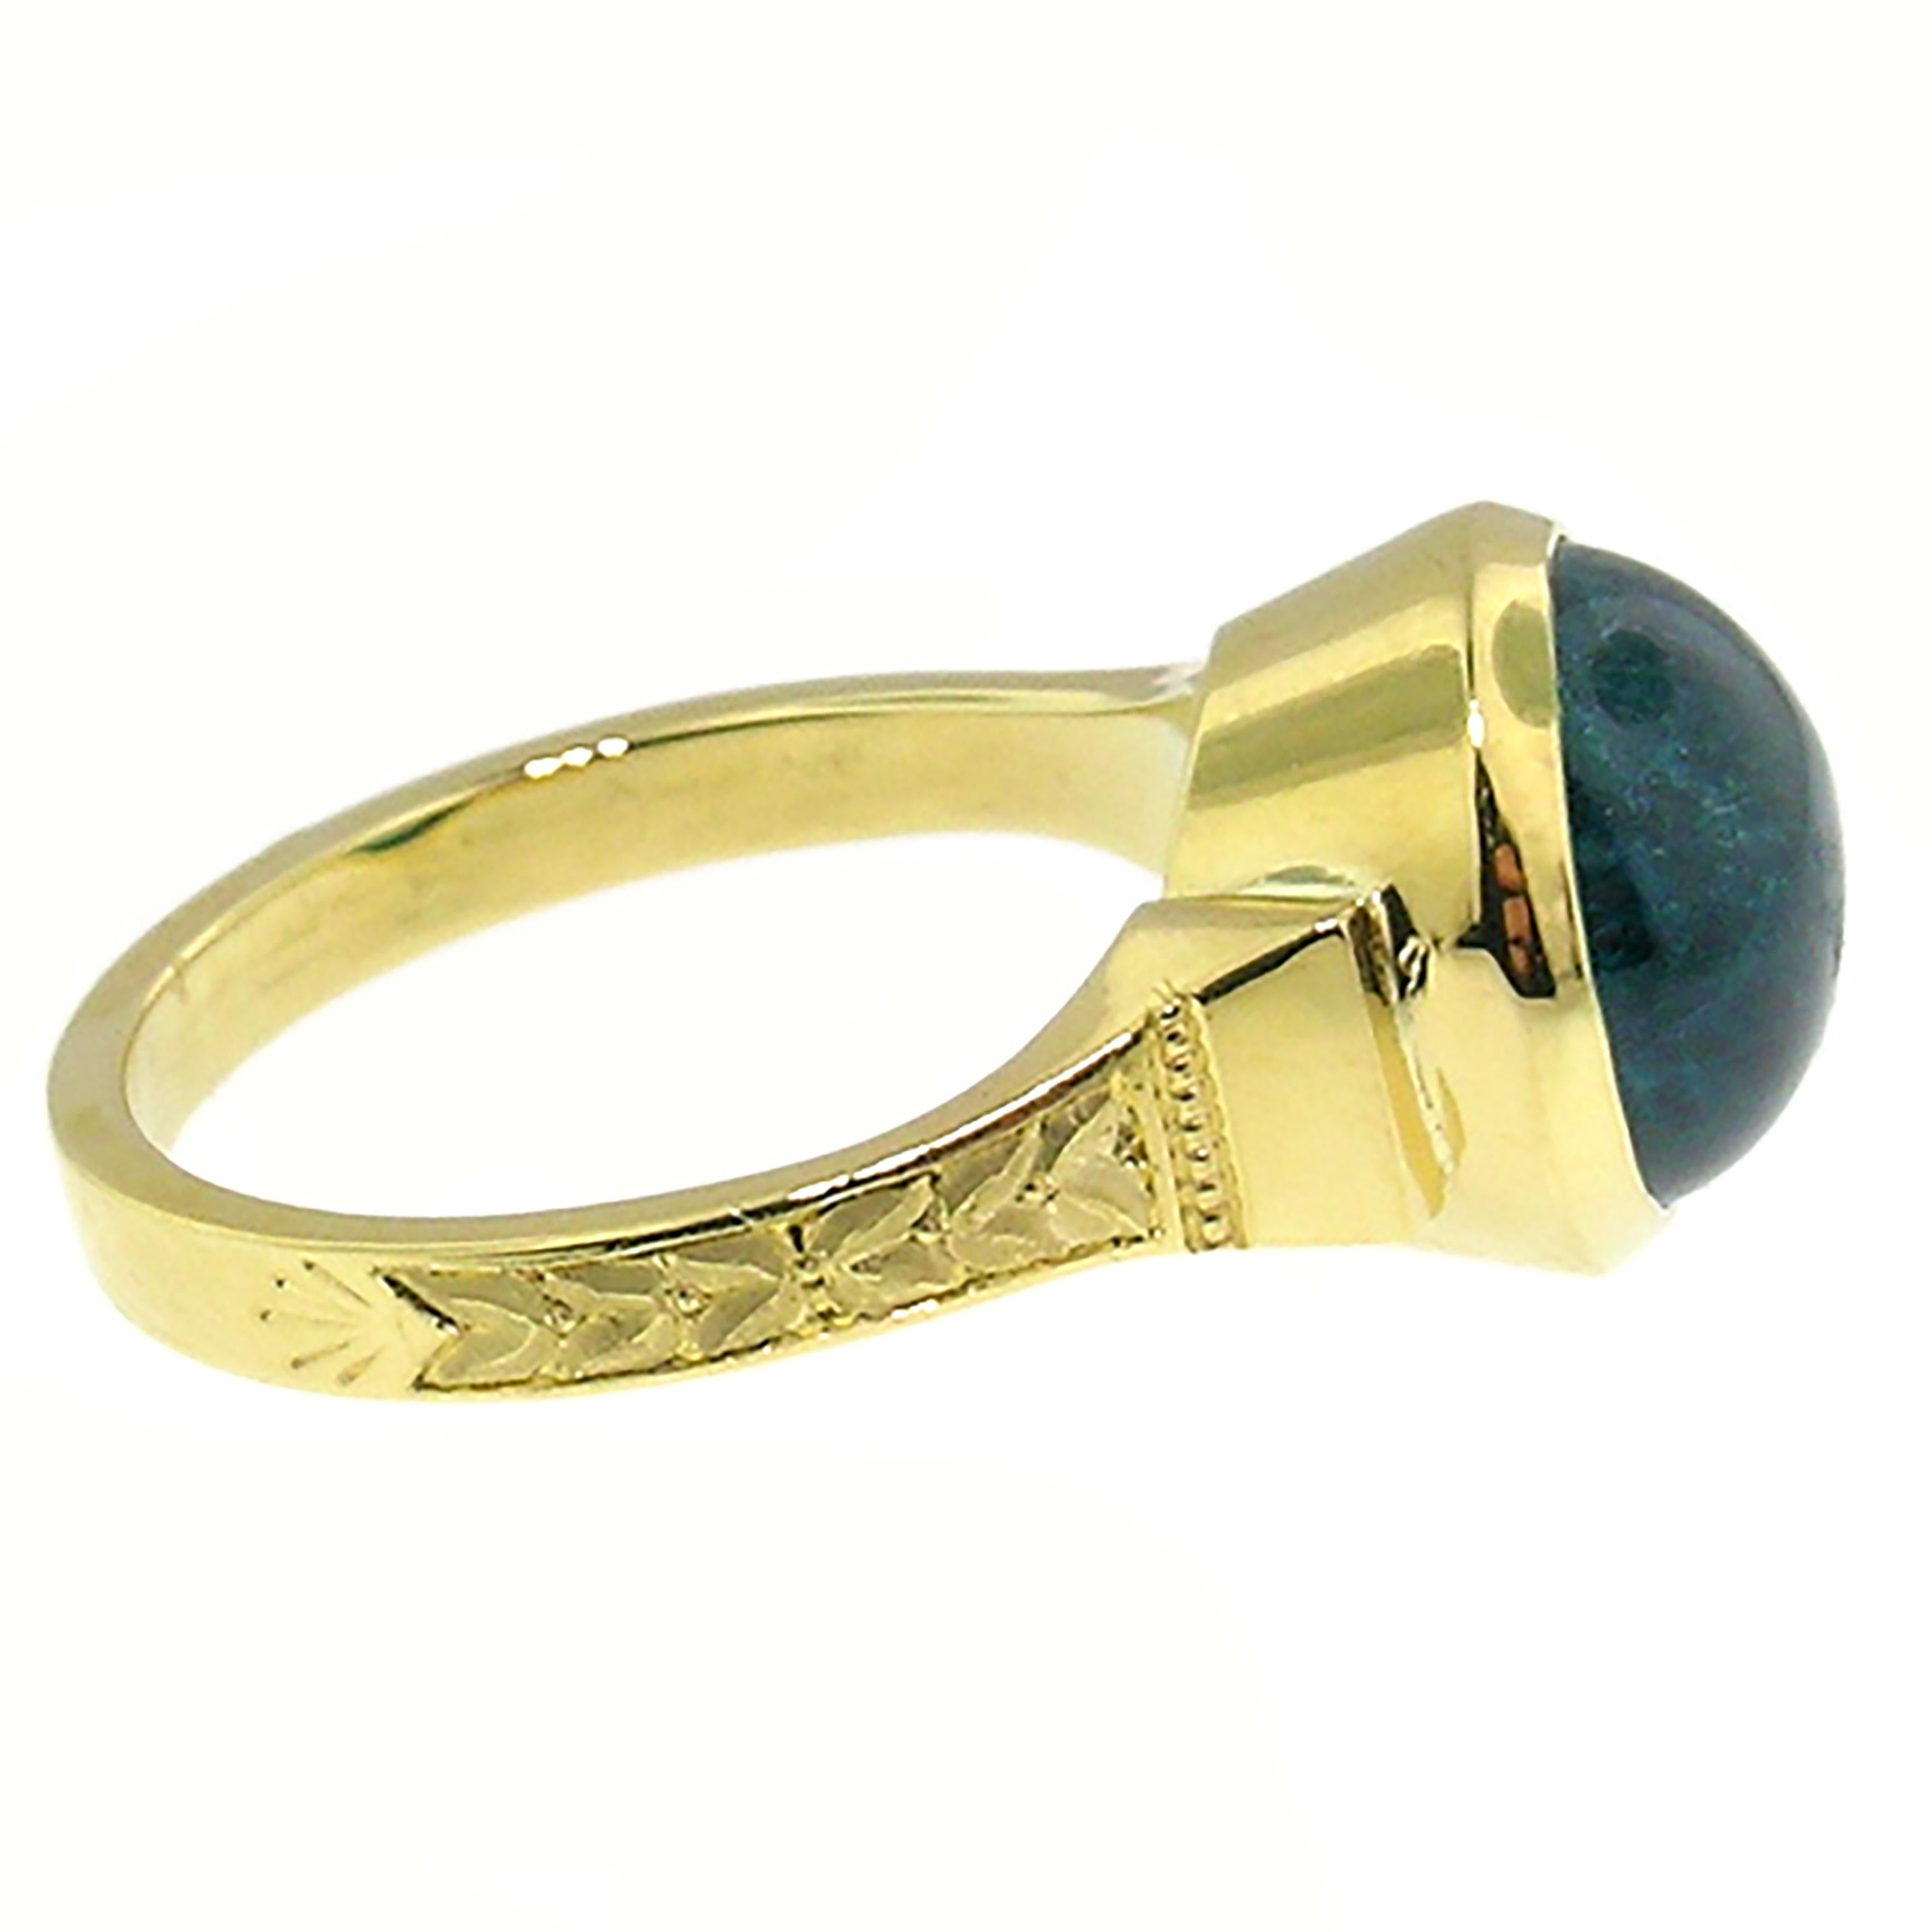 4.64ct Blue Tourmaline Indicolite 18kt Cassandra Ring by Cynthia Scott Jewelry In New Condition For Sale In Logan, UT